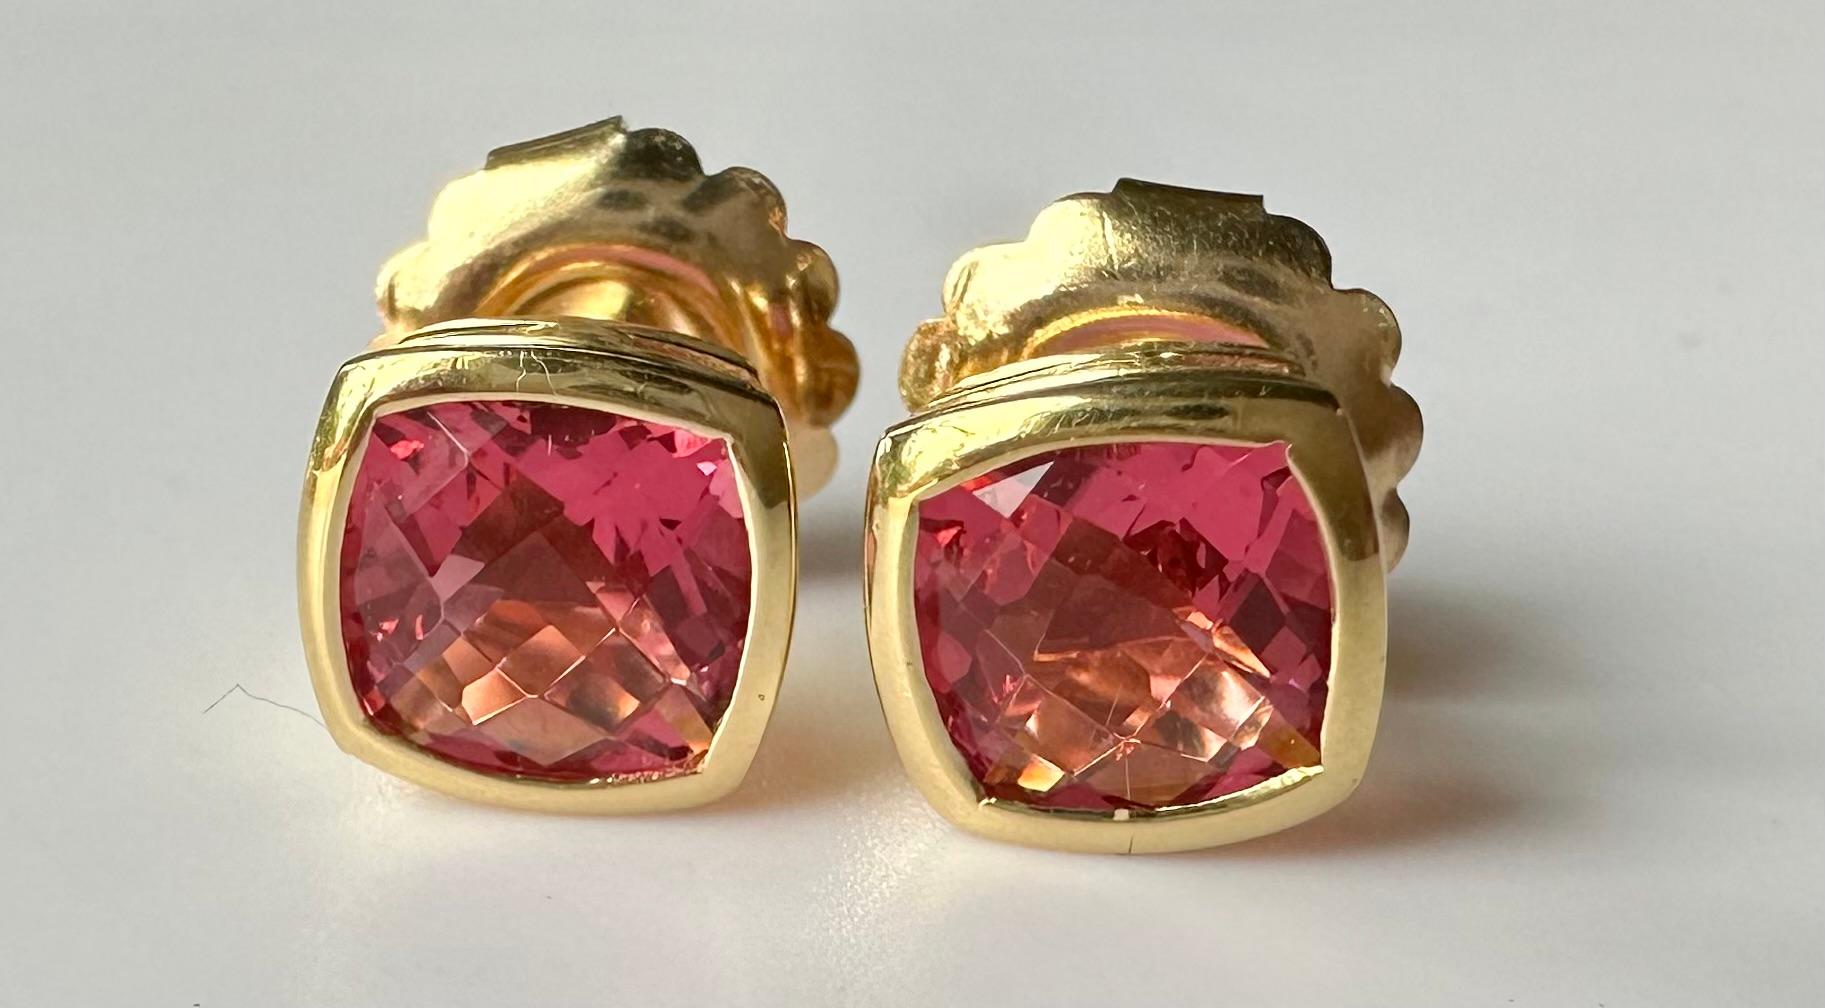 A pair of 18kt Yellow Gold Earrings set with 2 Cushion Checkerboard Cut Shocking Pink Tourmalines. Tourmalines are from the Minas Gerais state of Brazil. These Tourmalines are 2 of a larger parcel purchased by Kary Adam in Brazil and were selected